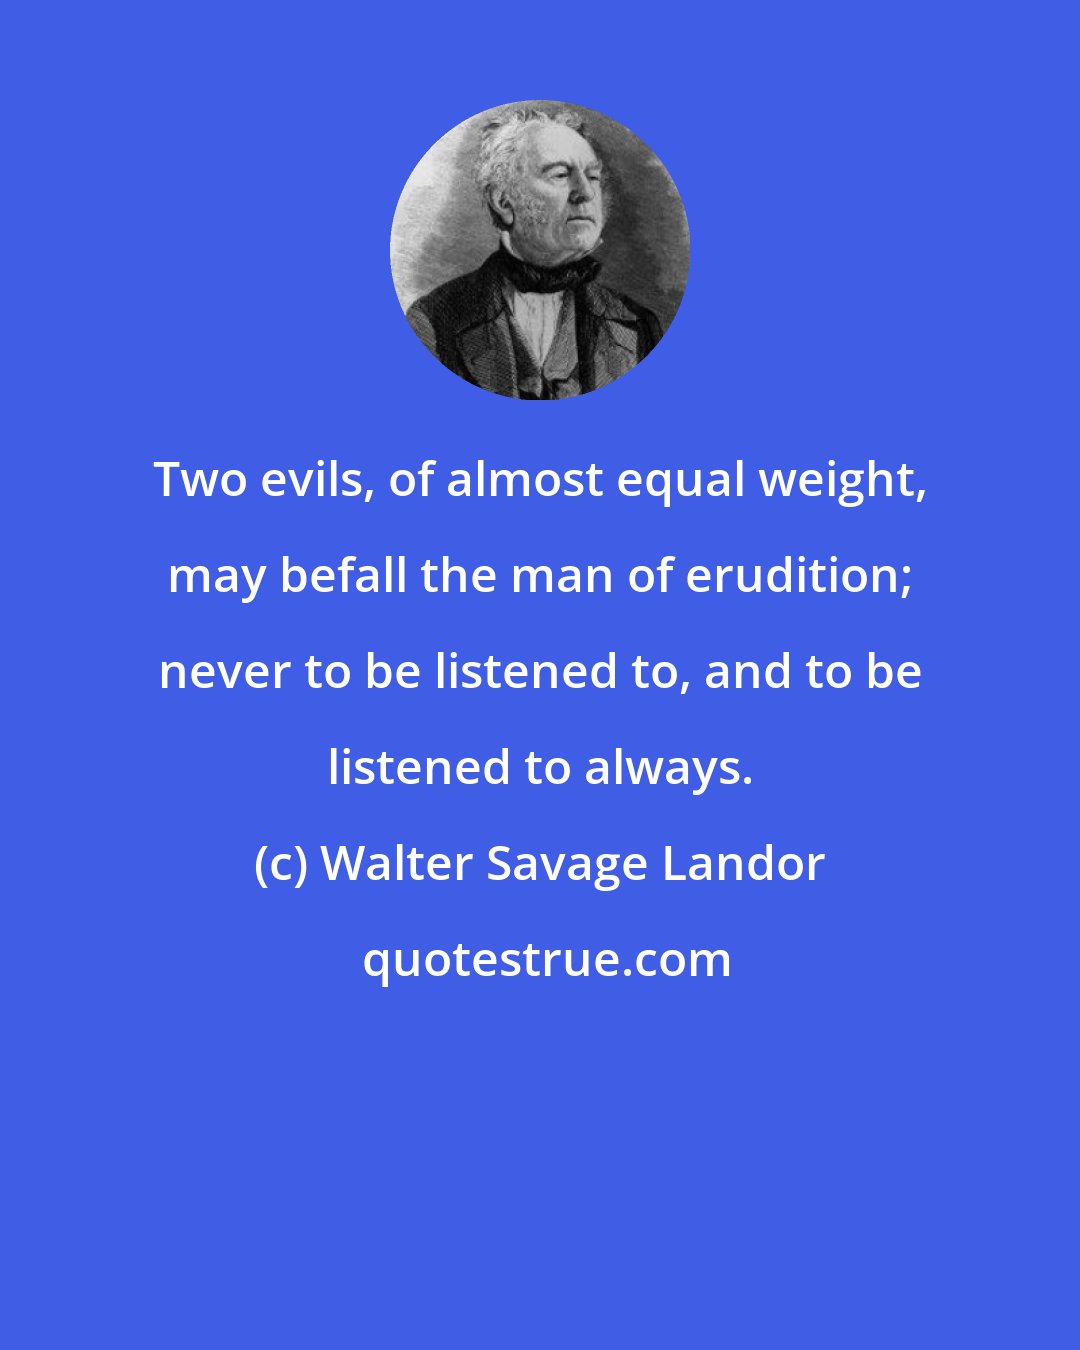 Walter Savage Landor: Two evils, of almost equal weight, may befall the man of erudition; never to be listened to, and to be listened to always.